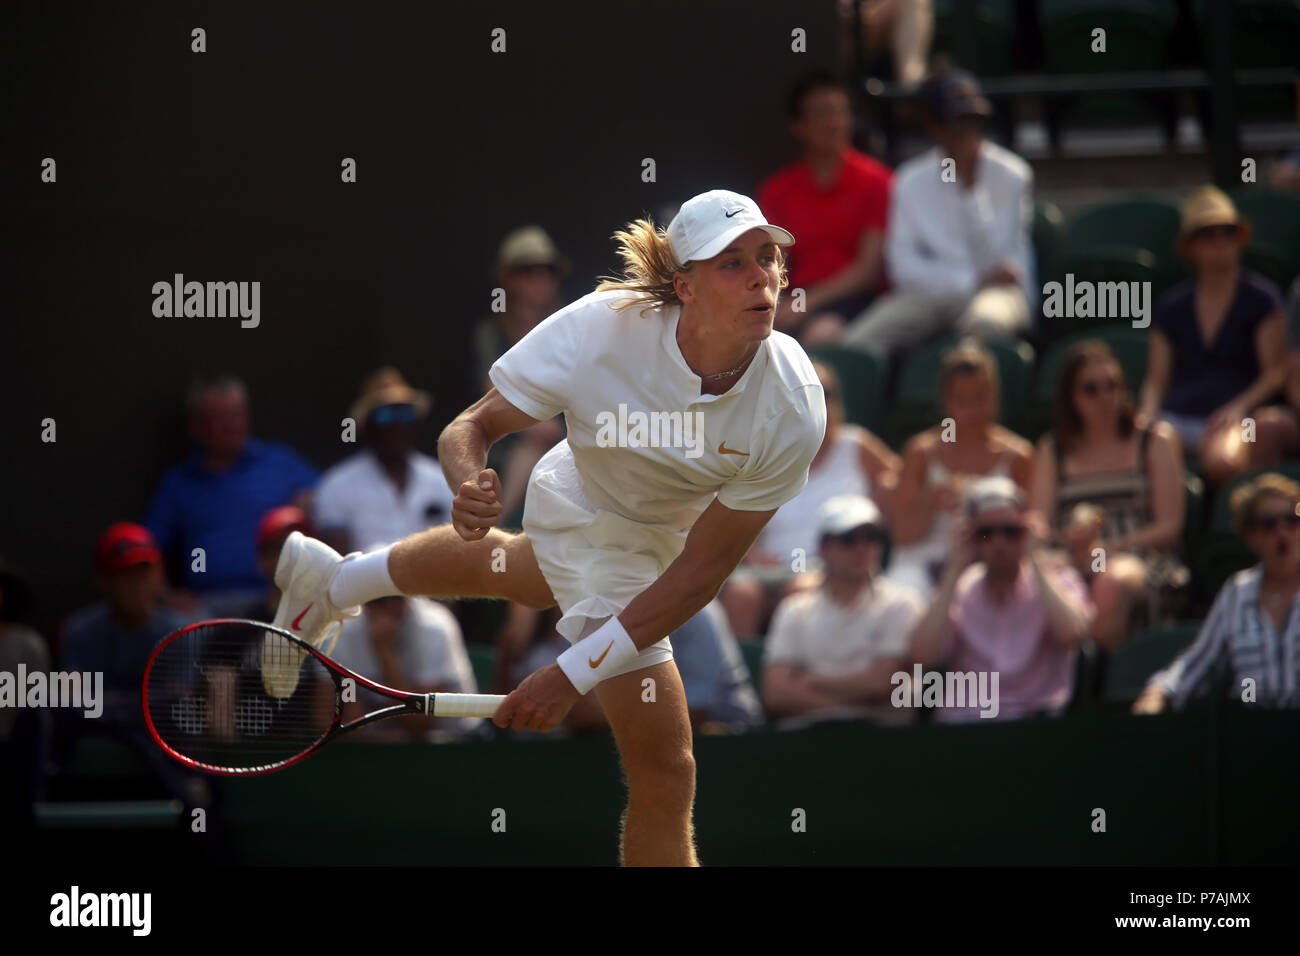 London, England - July 5, 2018.  Wimbledon Tennis:  Canada's Denis Shapovalov on action against France'd Benoit Paire during second round action at Wimbledon today. Credit: Adam Stoltman/Alamy Live News Stock Photo